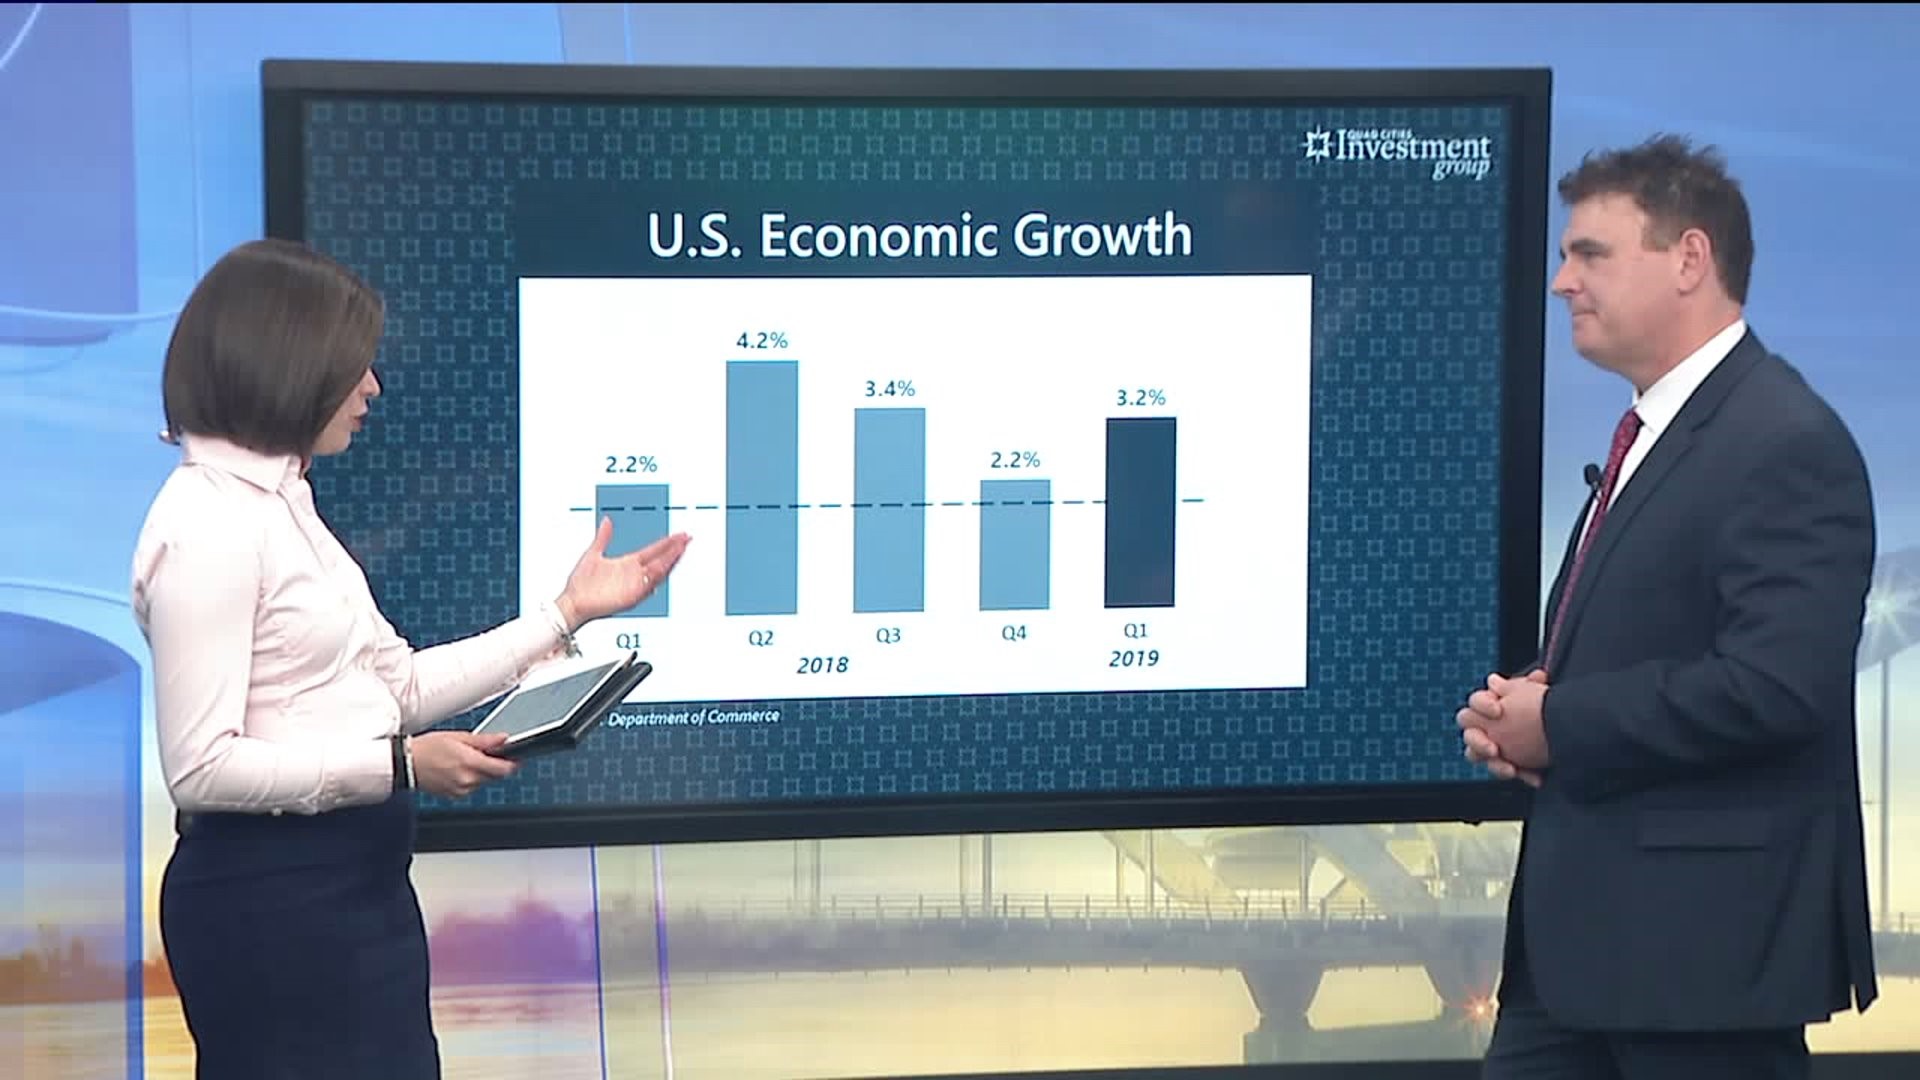 An In-Depth Look At U.S. Economic Growth in 2019